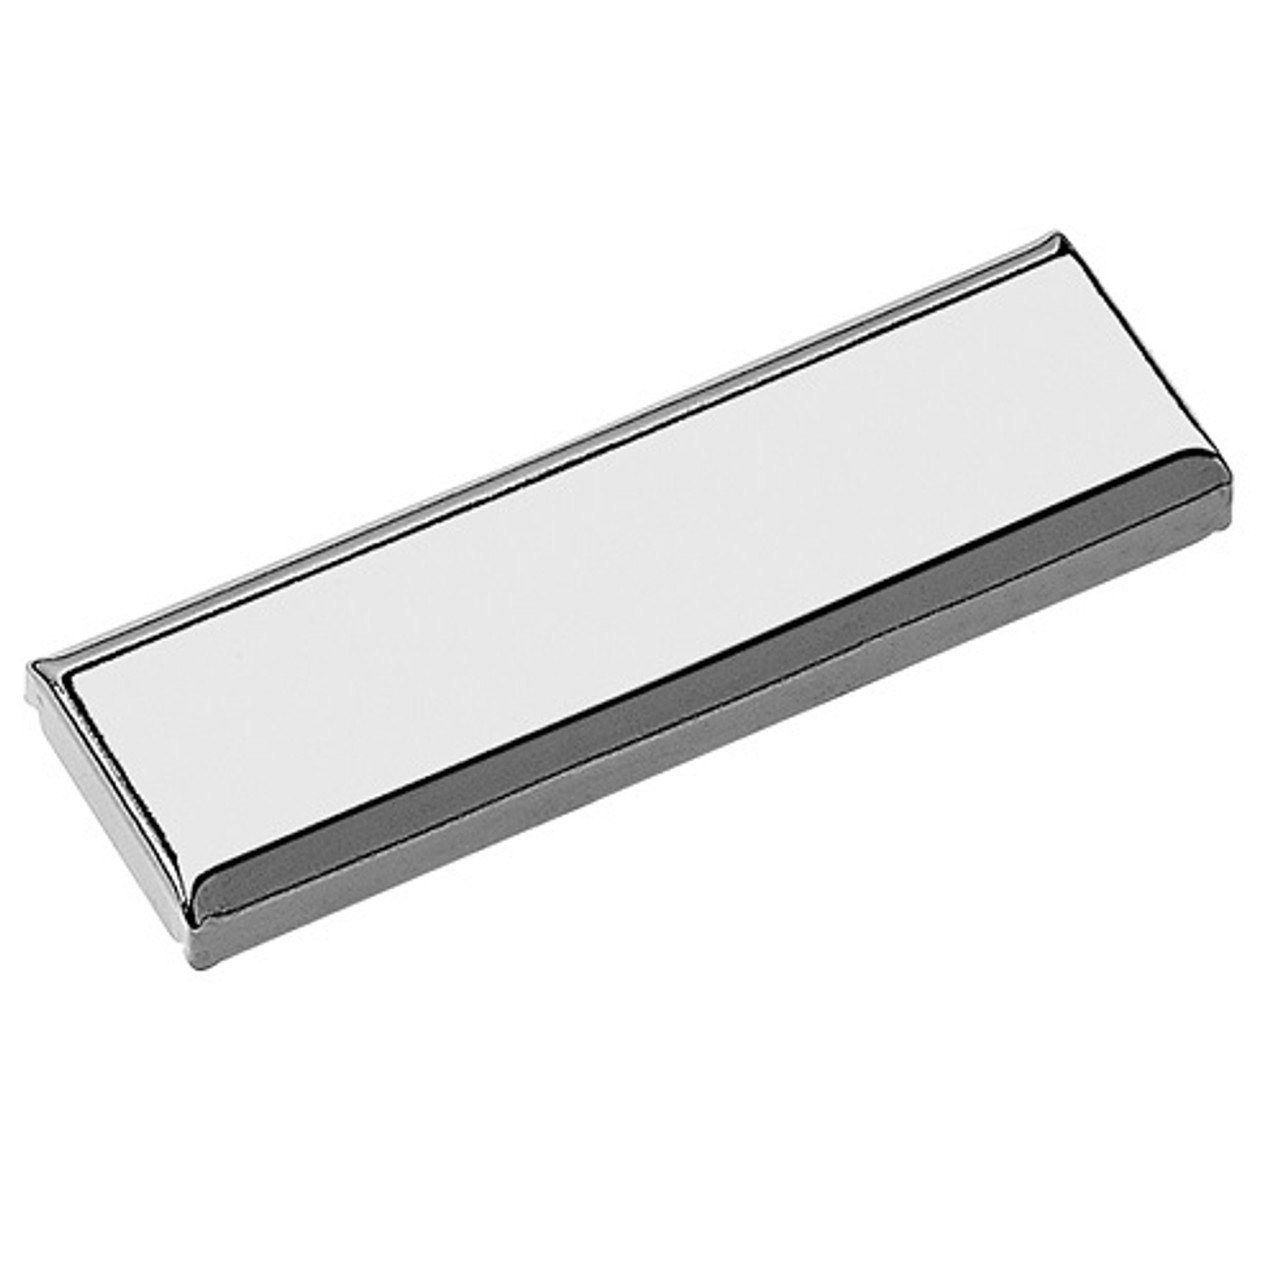 Blum 70.1563 - Hinge Arm Cover Cap for angled ; mini and glass door hinges